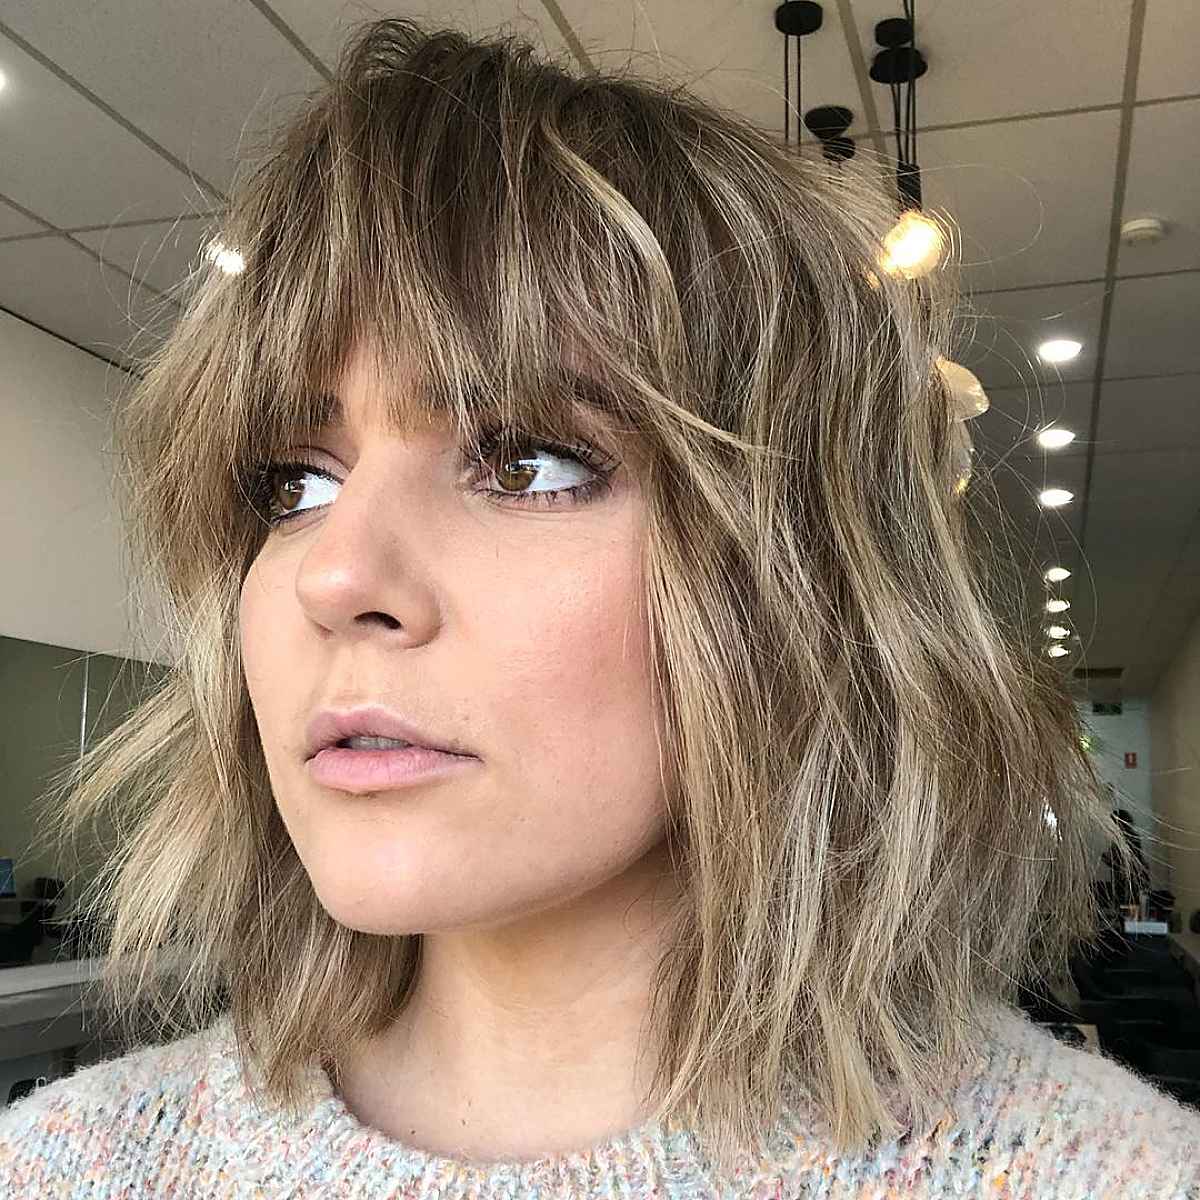 Feathered Full Fringe with Short Hair